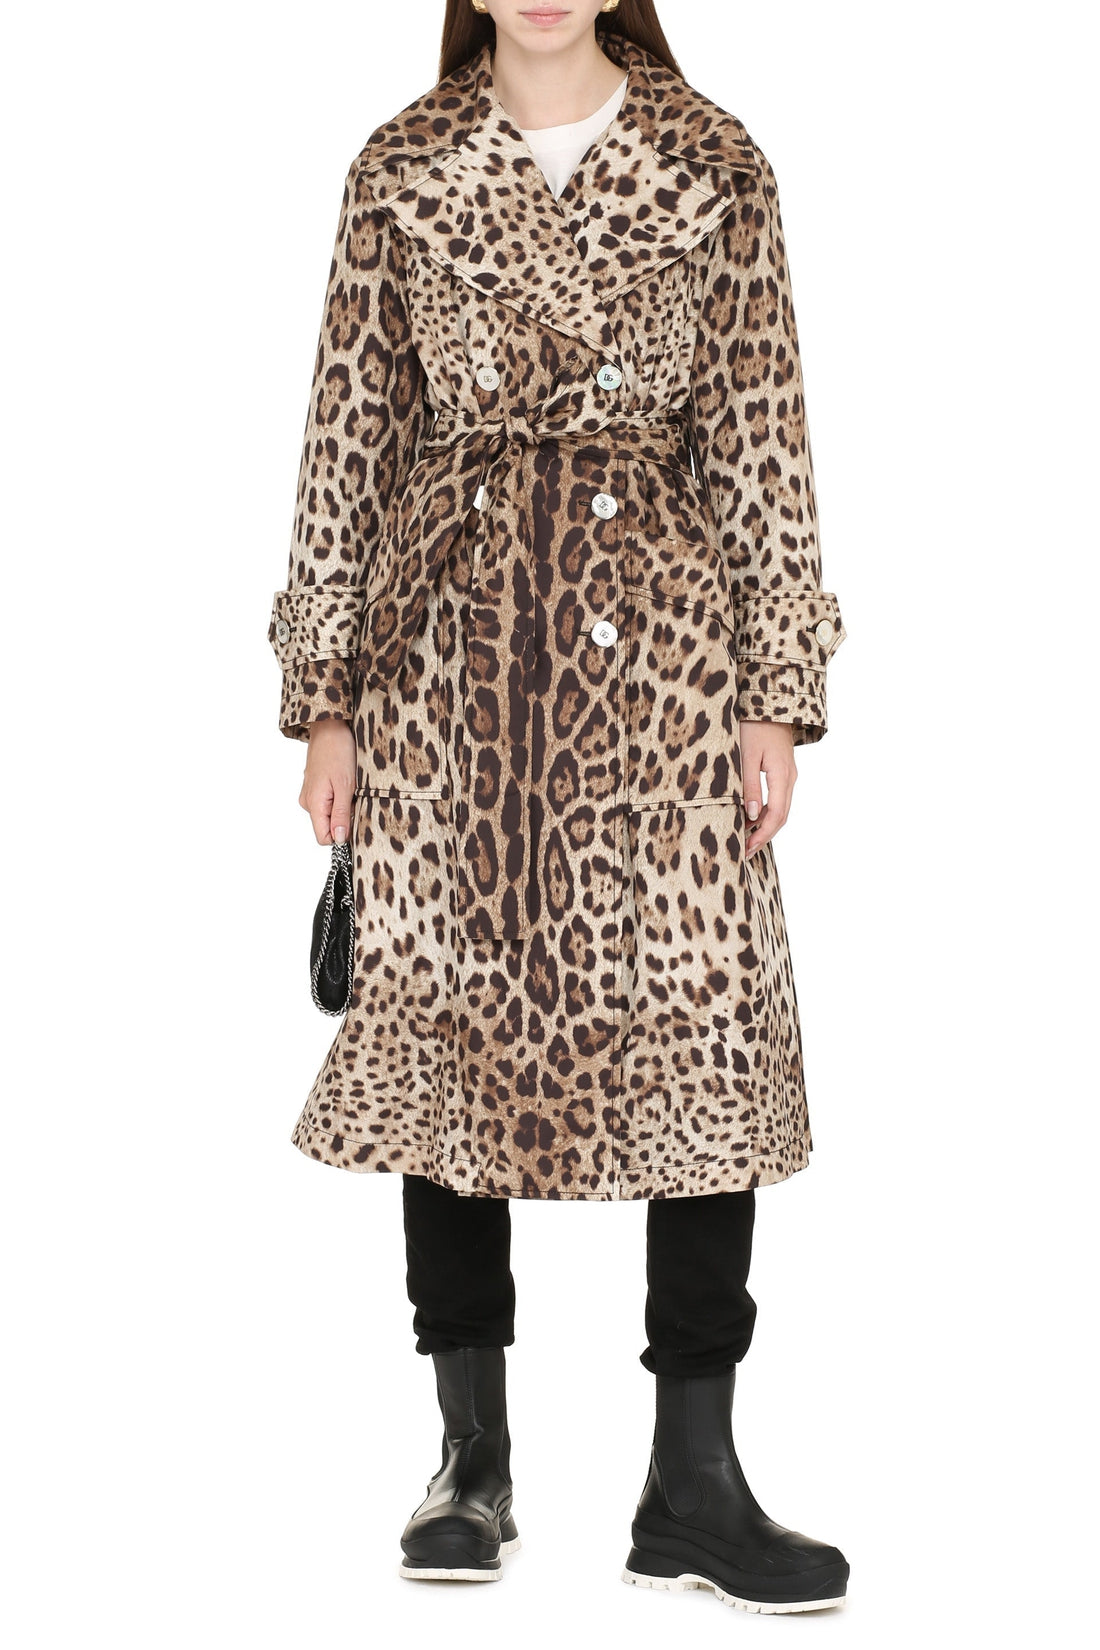 Dolce & Gabbana-OUTLET-SALE-Printed nylon trench coat-ARCHIVIST